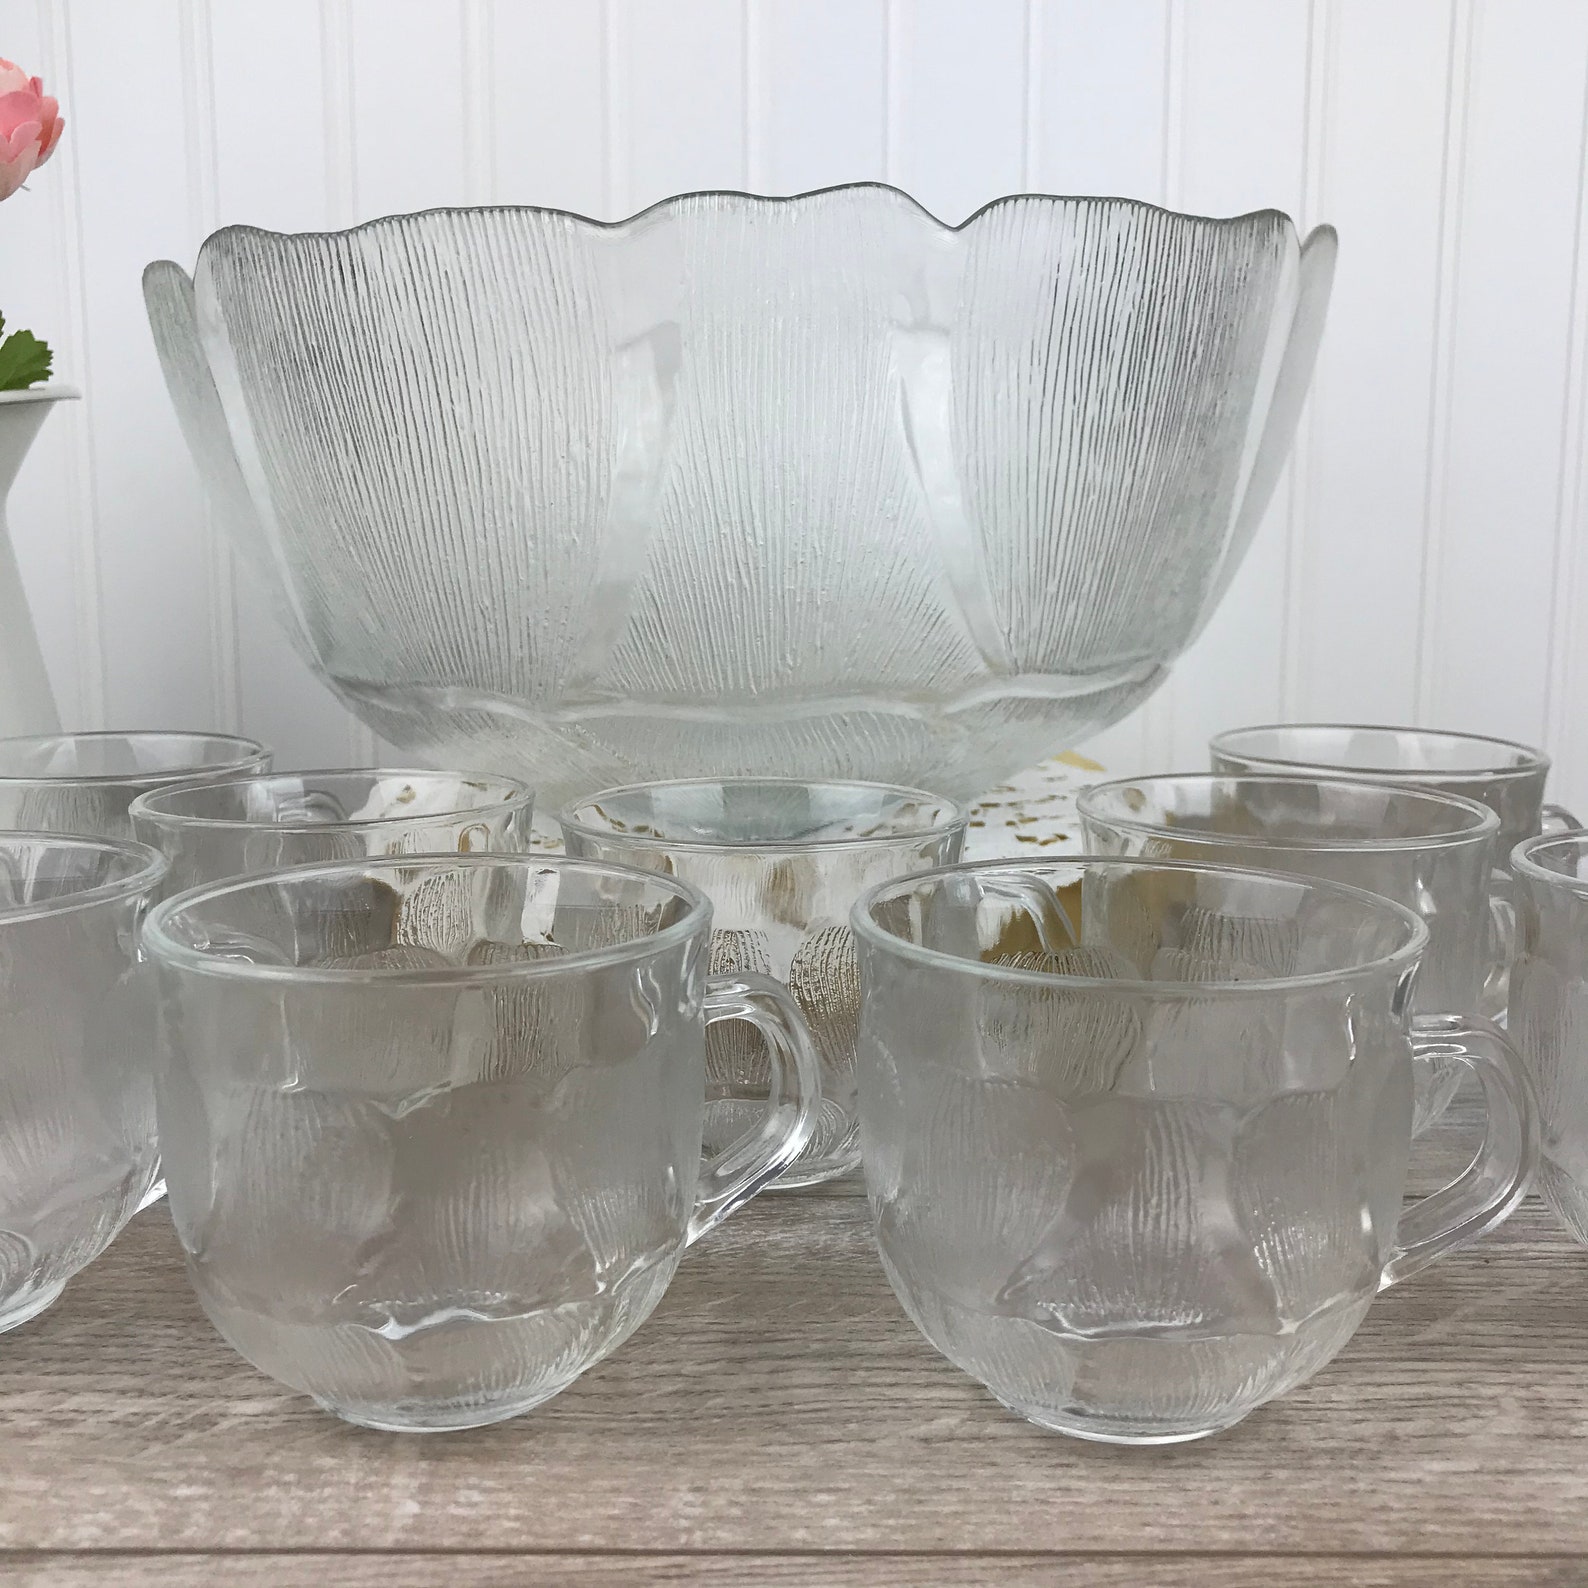 Vintage French Arcoroc Punch Bowl Set W Cups Pressed Etsy